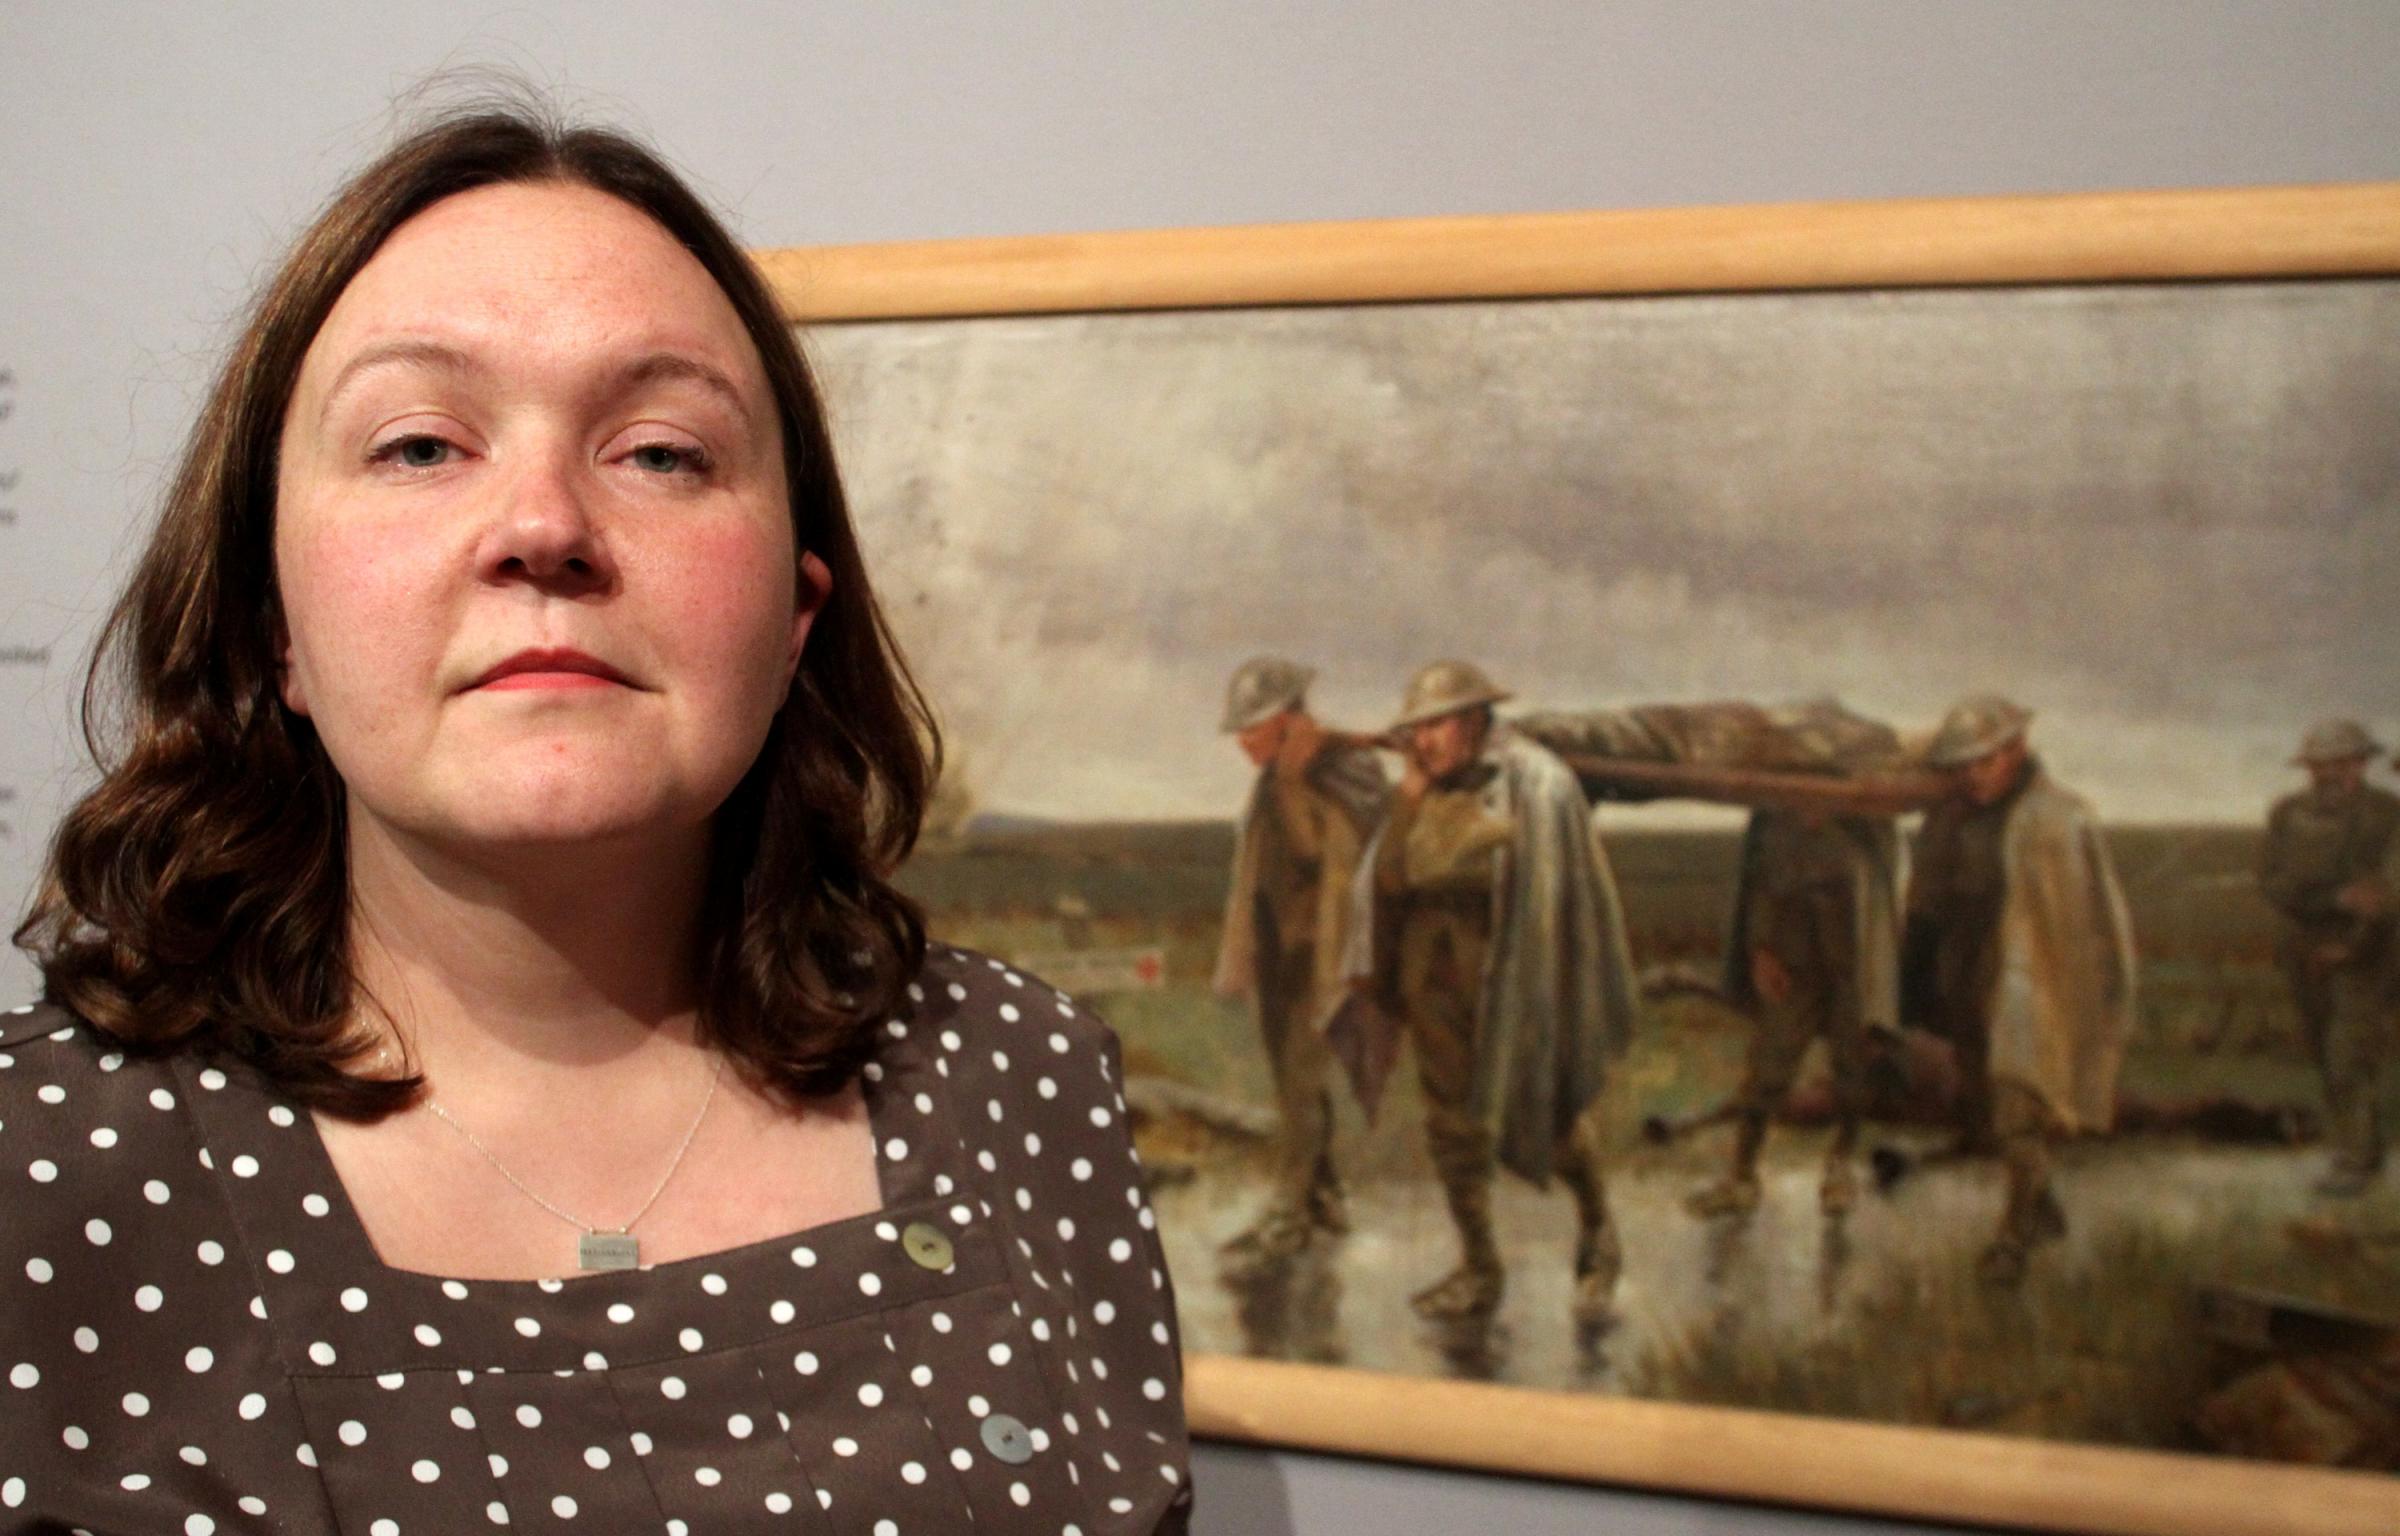 Exhibition at Newcastle’s Hatton Gallery examines horrors of First World War